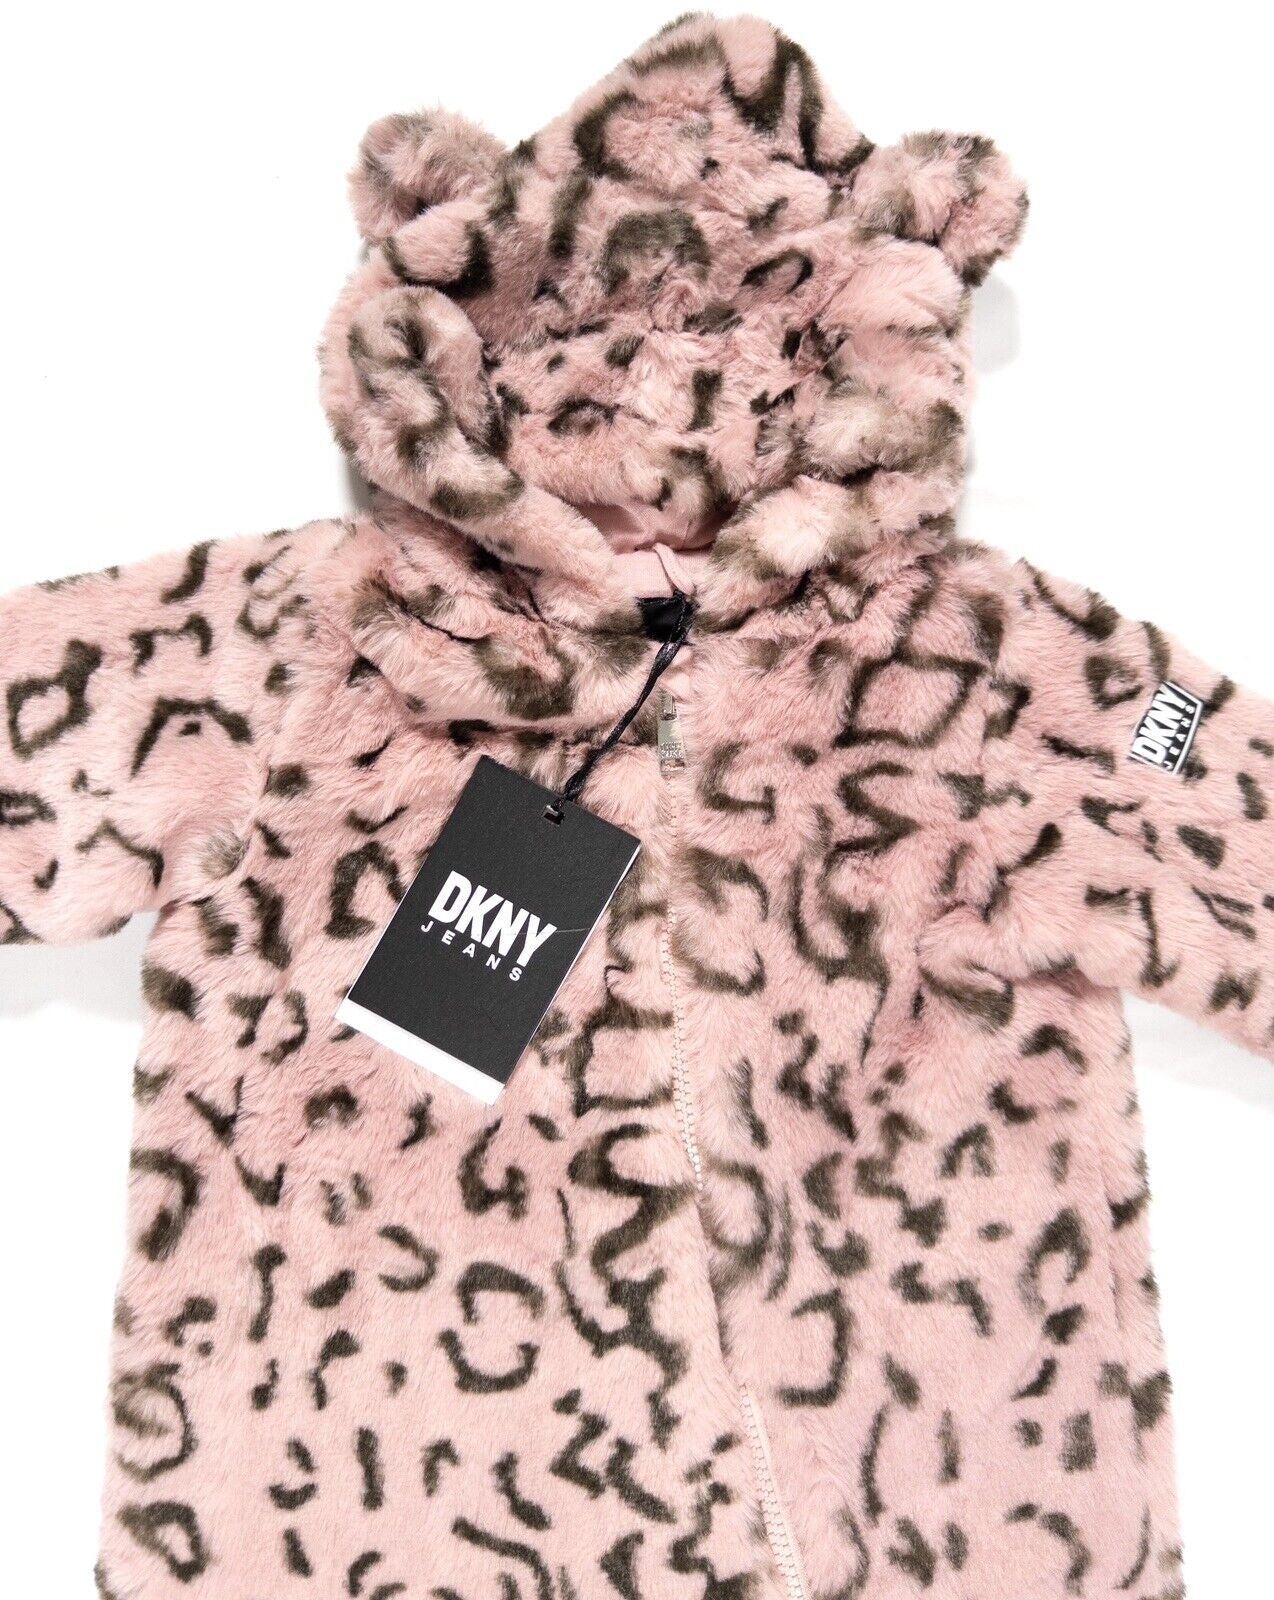 DKNY JEANS Girls Baby All in One Snowsuit Pink Size UK 3-6 Months